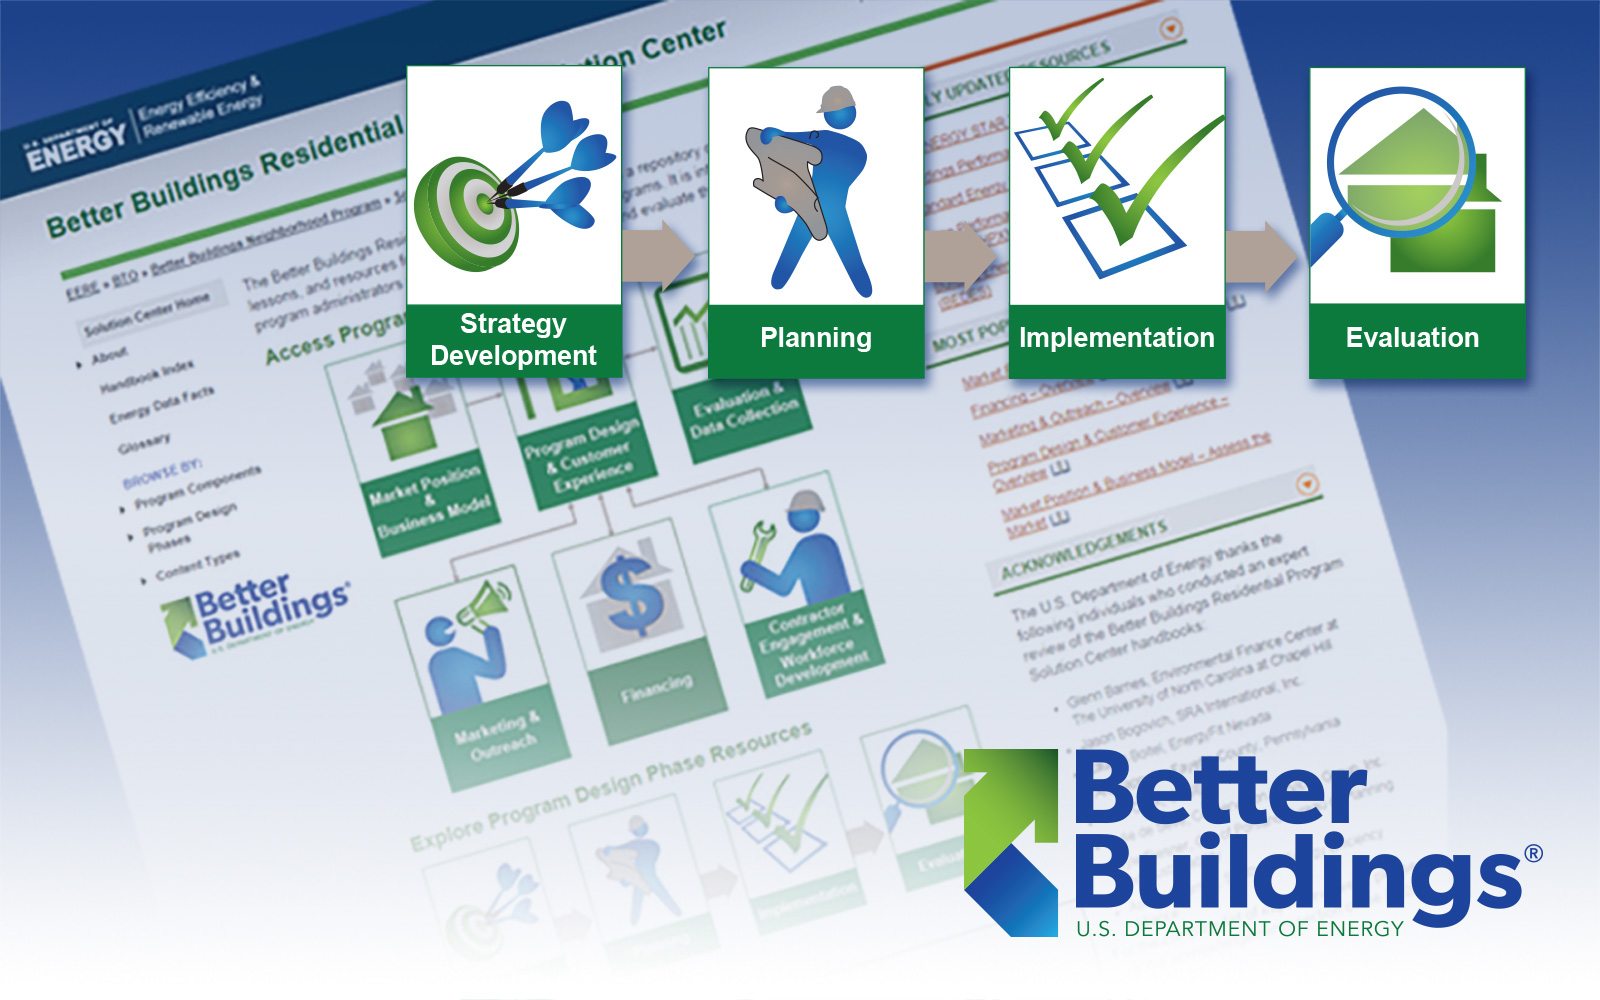 Screenshot of DOE Better Buildings publication with four icons in the foreground for Strategy Development, Planning, Implementation, and Evaluation